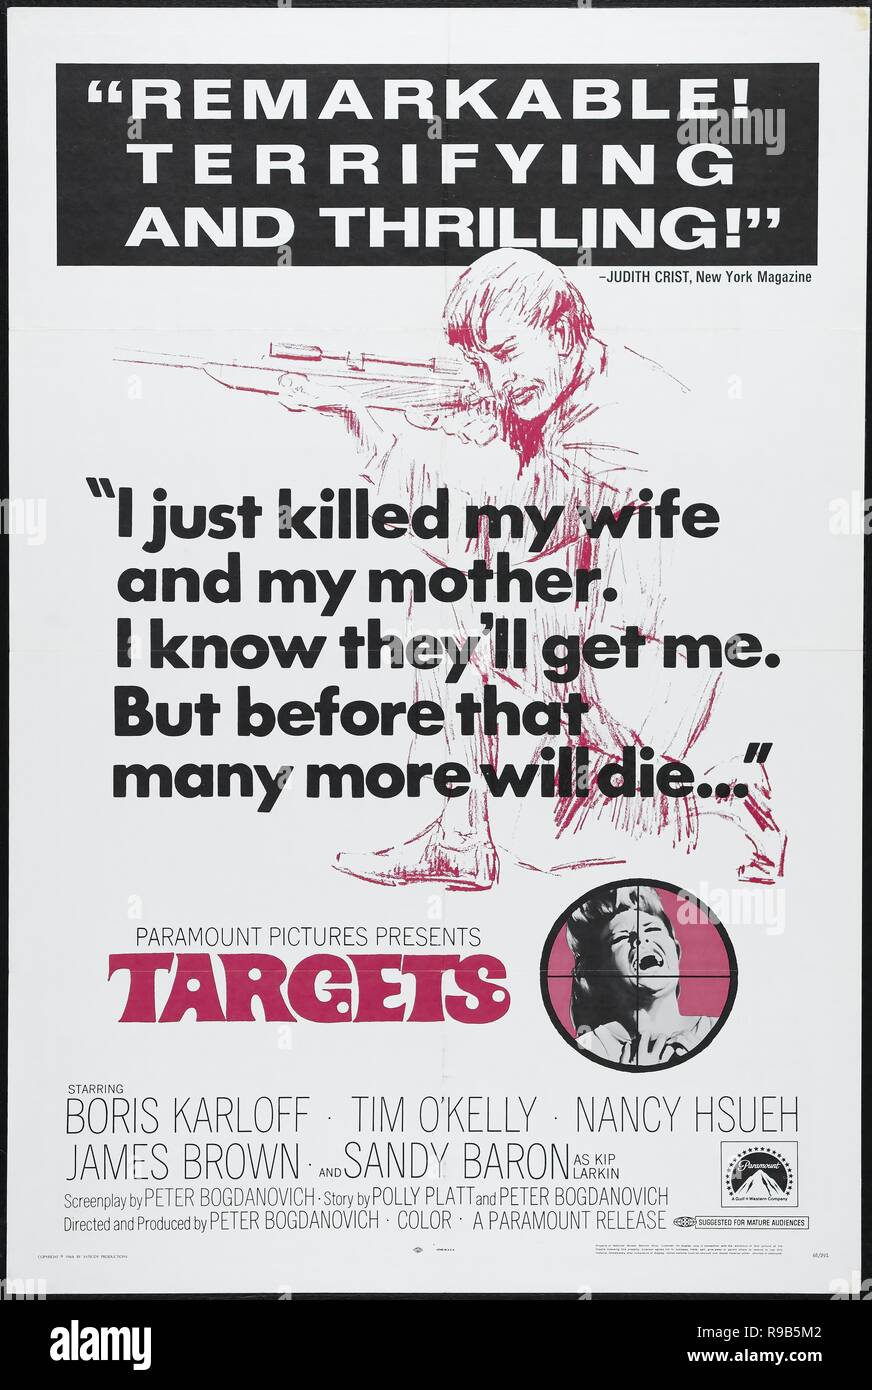 Original film title: TARGETS. English title: TARGETS. Year: 1968. Director: PETER BOGDANOVICH. Credit: PARAMOUNT PICTURES / Album Stock Photo